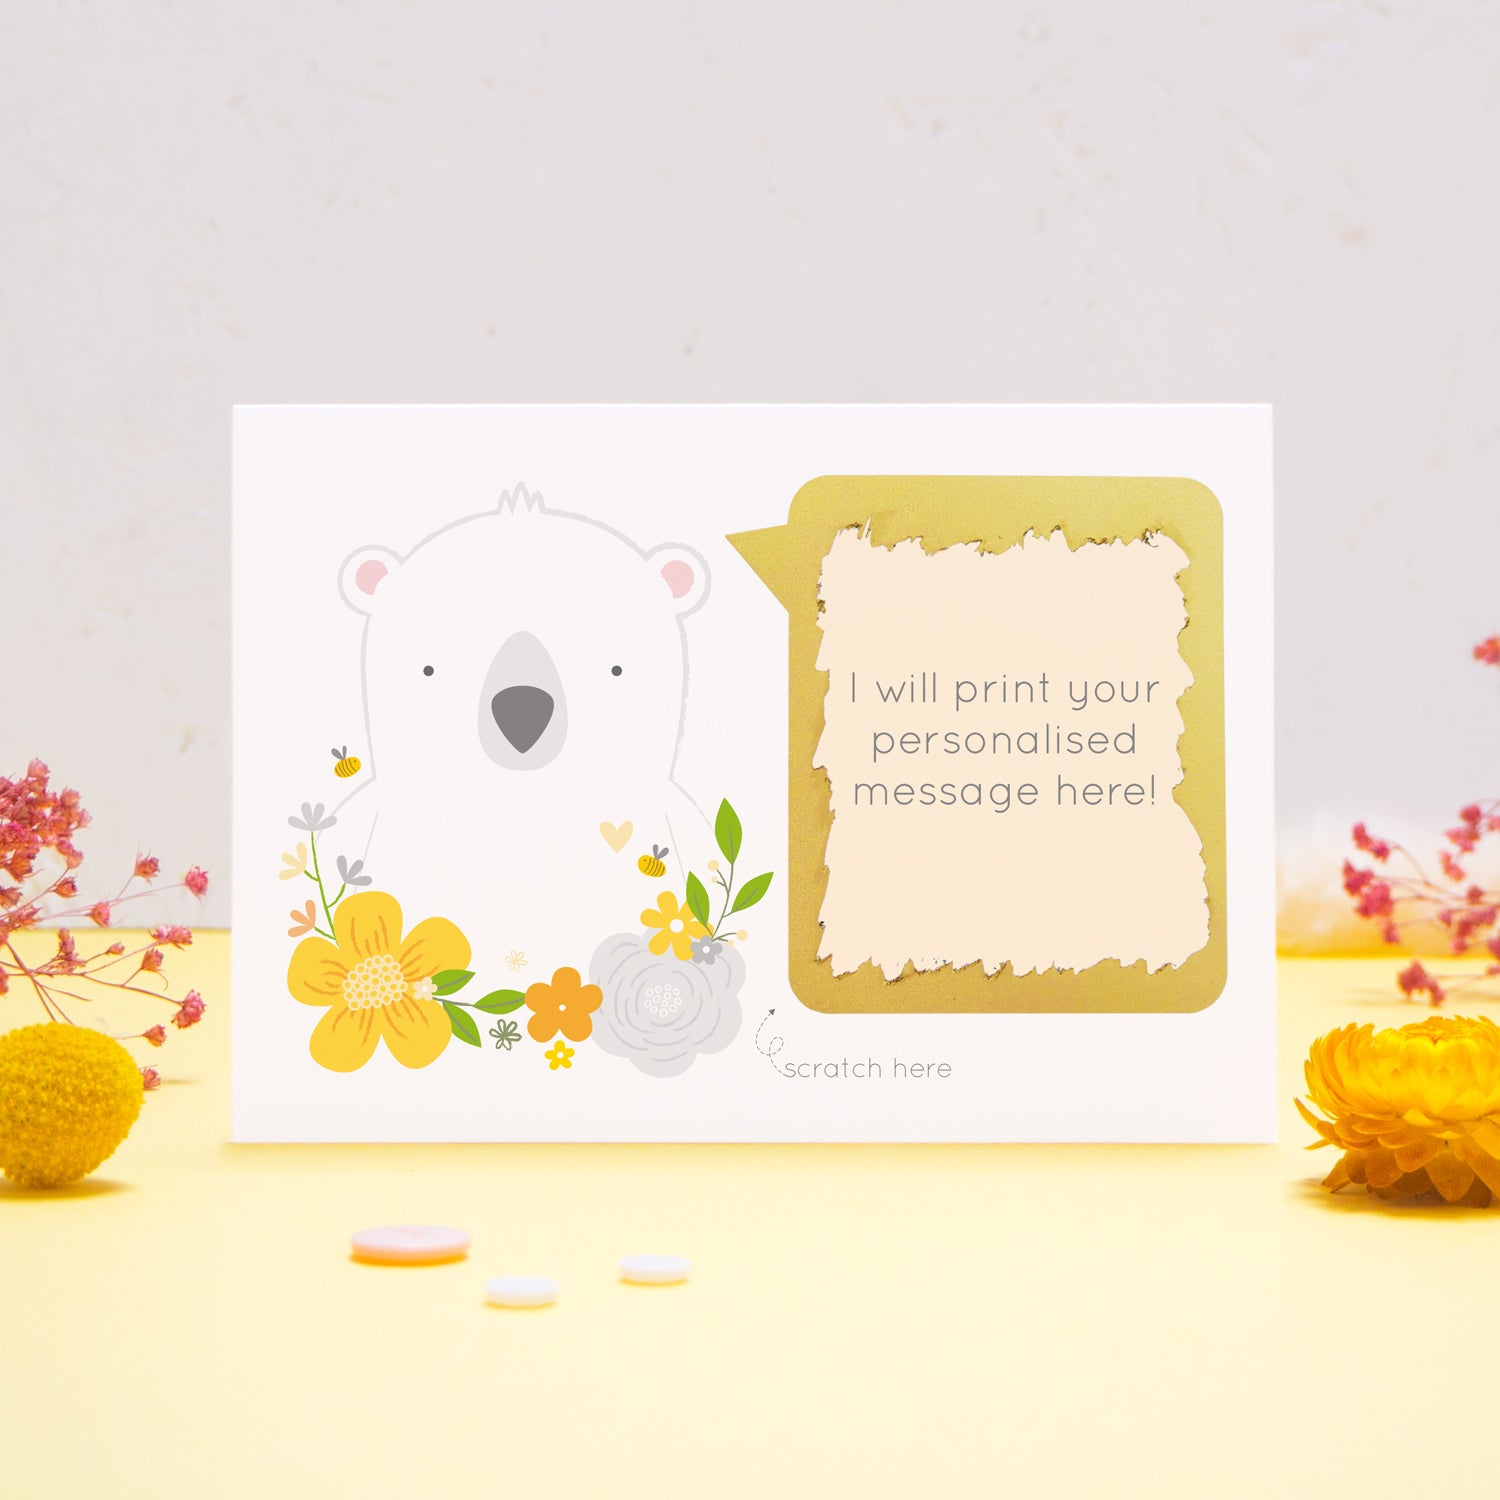 A personalised scratch card showing where your message will be printed featuring a white bear, yellow flowers and a peach text box. This has been shot on a yellow and grey background with flowers. The gold panel has been scratched away to reveal the message.